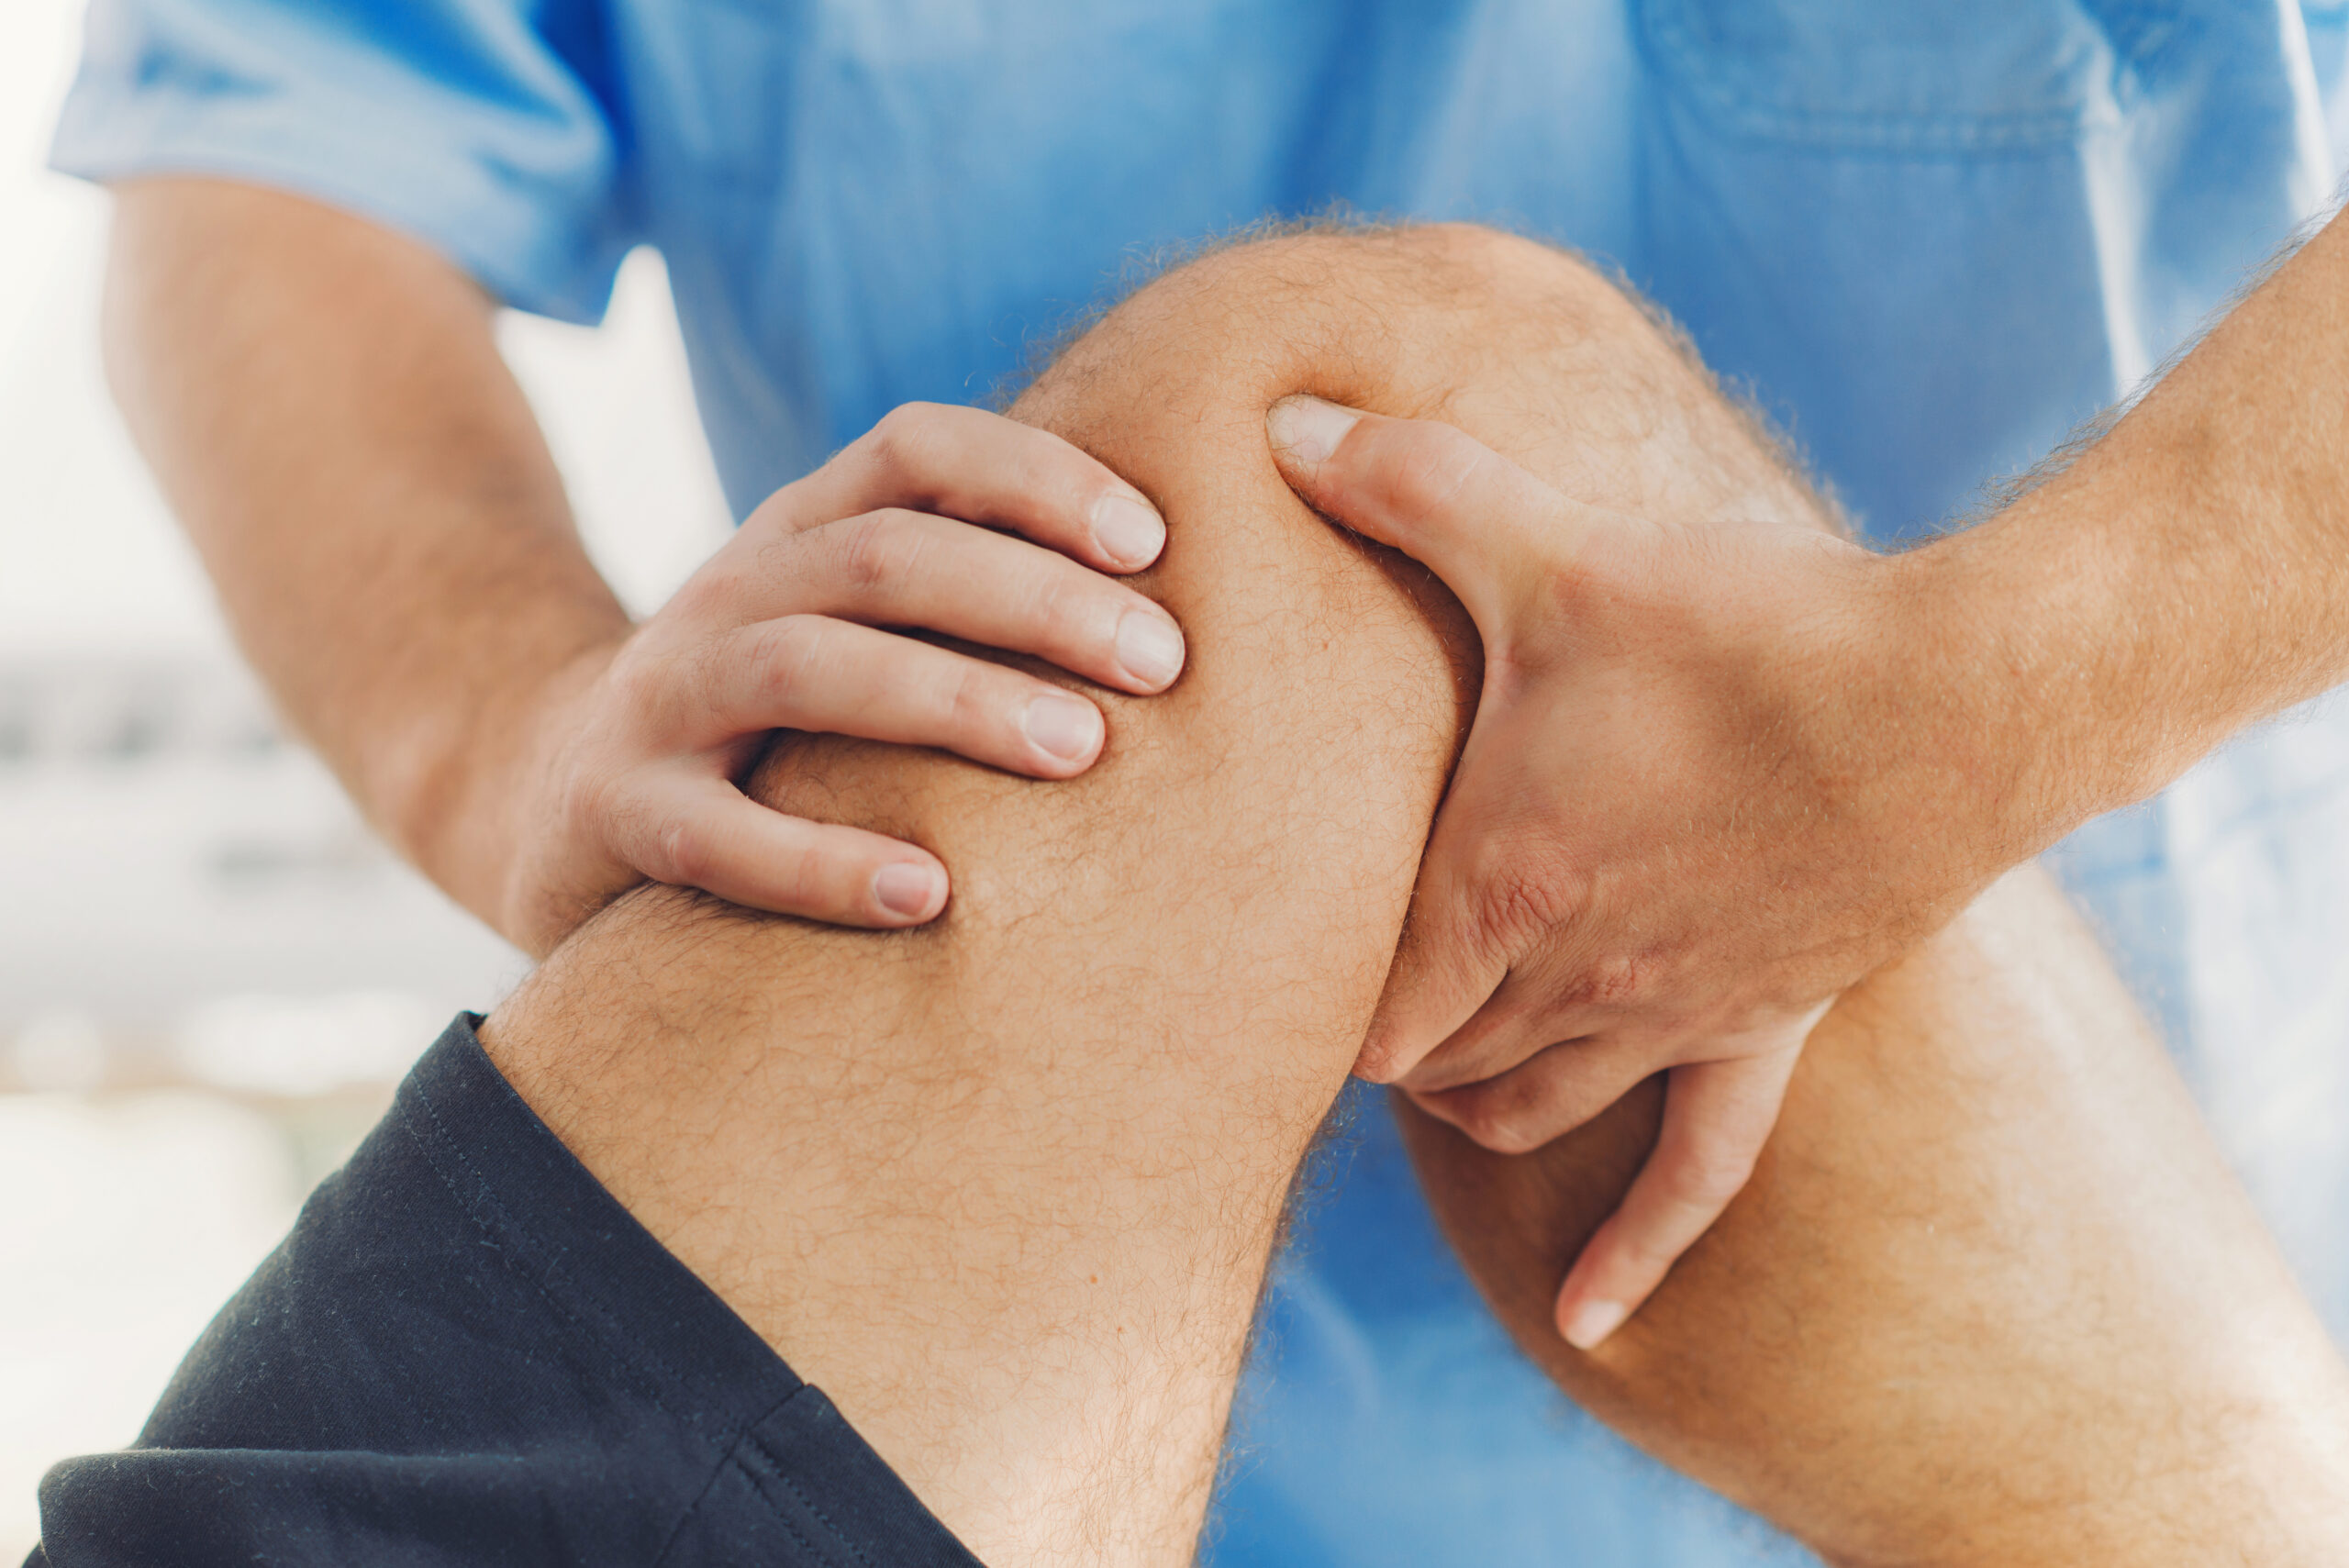 A man's knee receiving physical therapy for acute knee pain treatment.